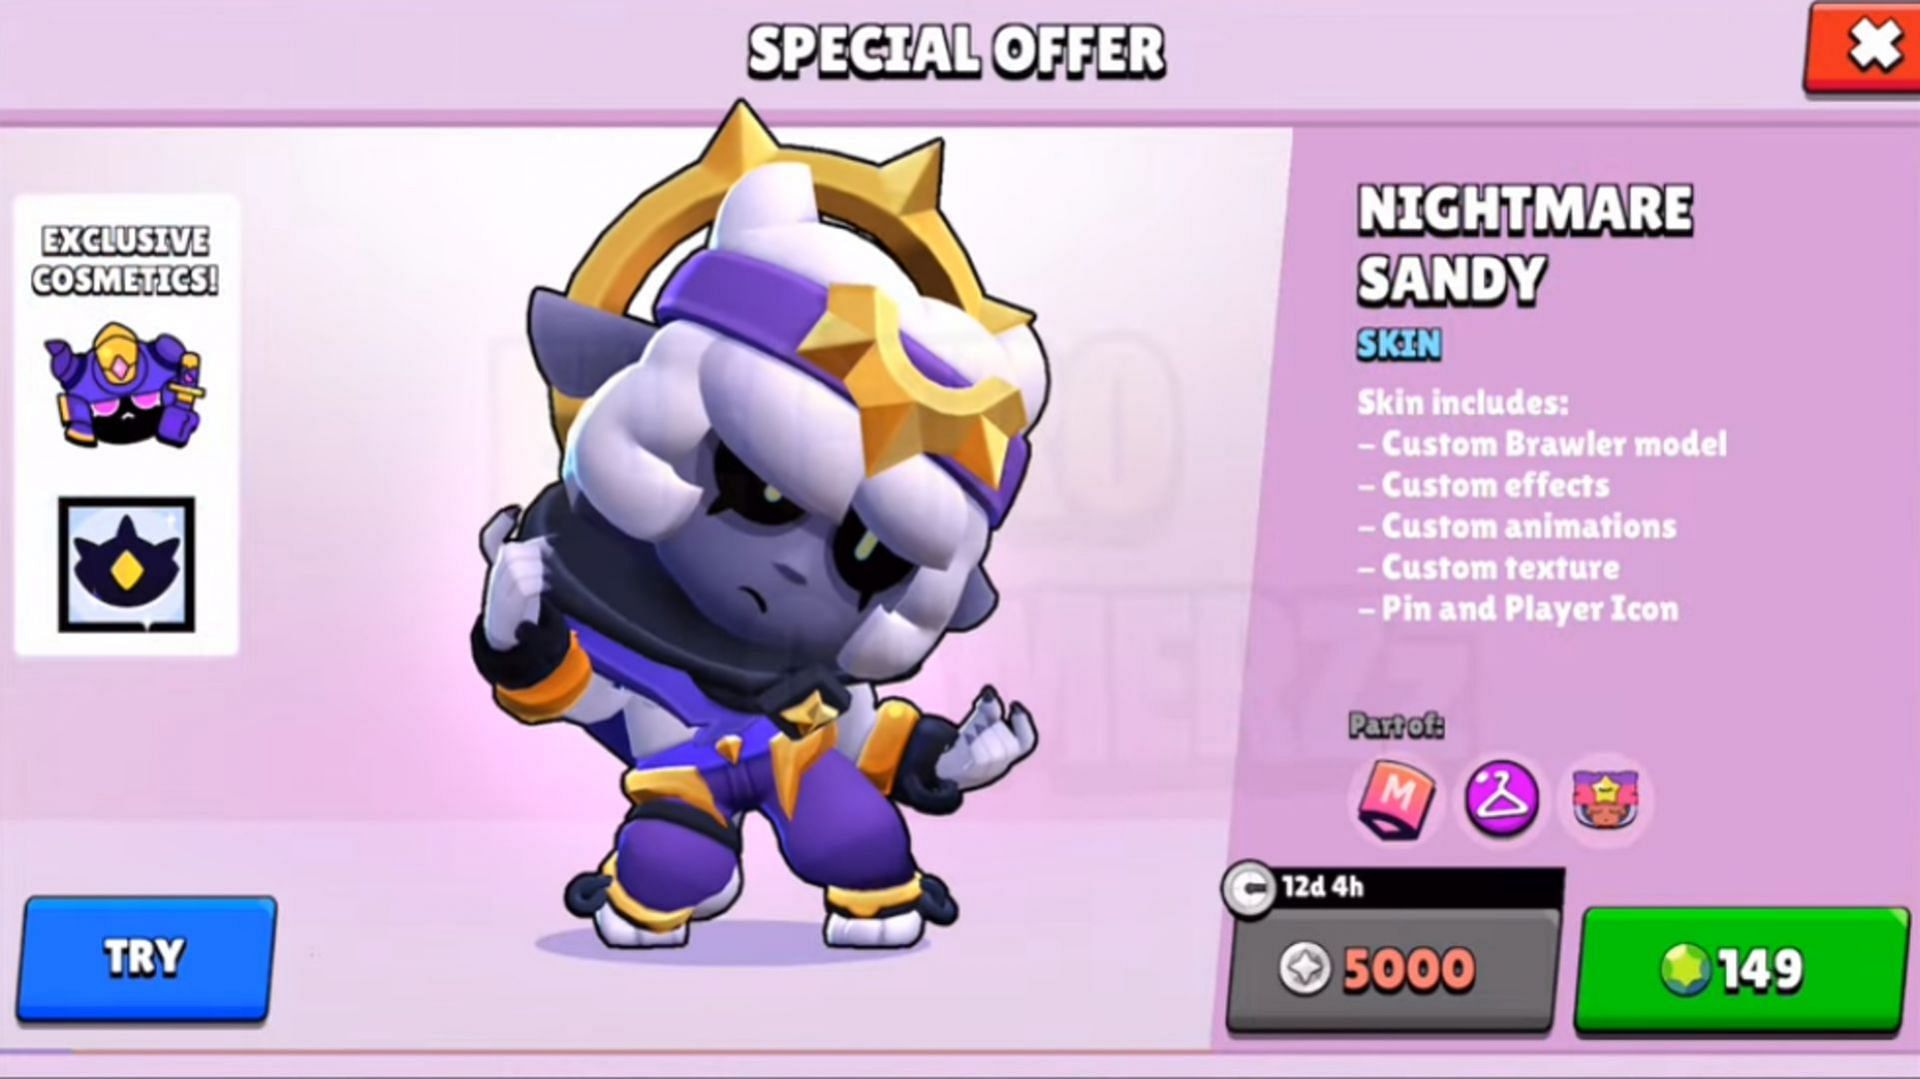 Required cost of the Brawl Stars Nightmare Sandy Skin (Image via ELECTRO GAMERZz/YouTube || Supercell)